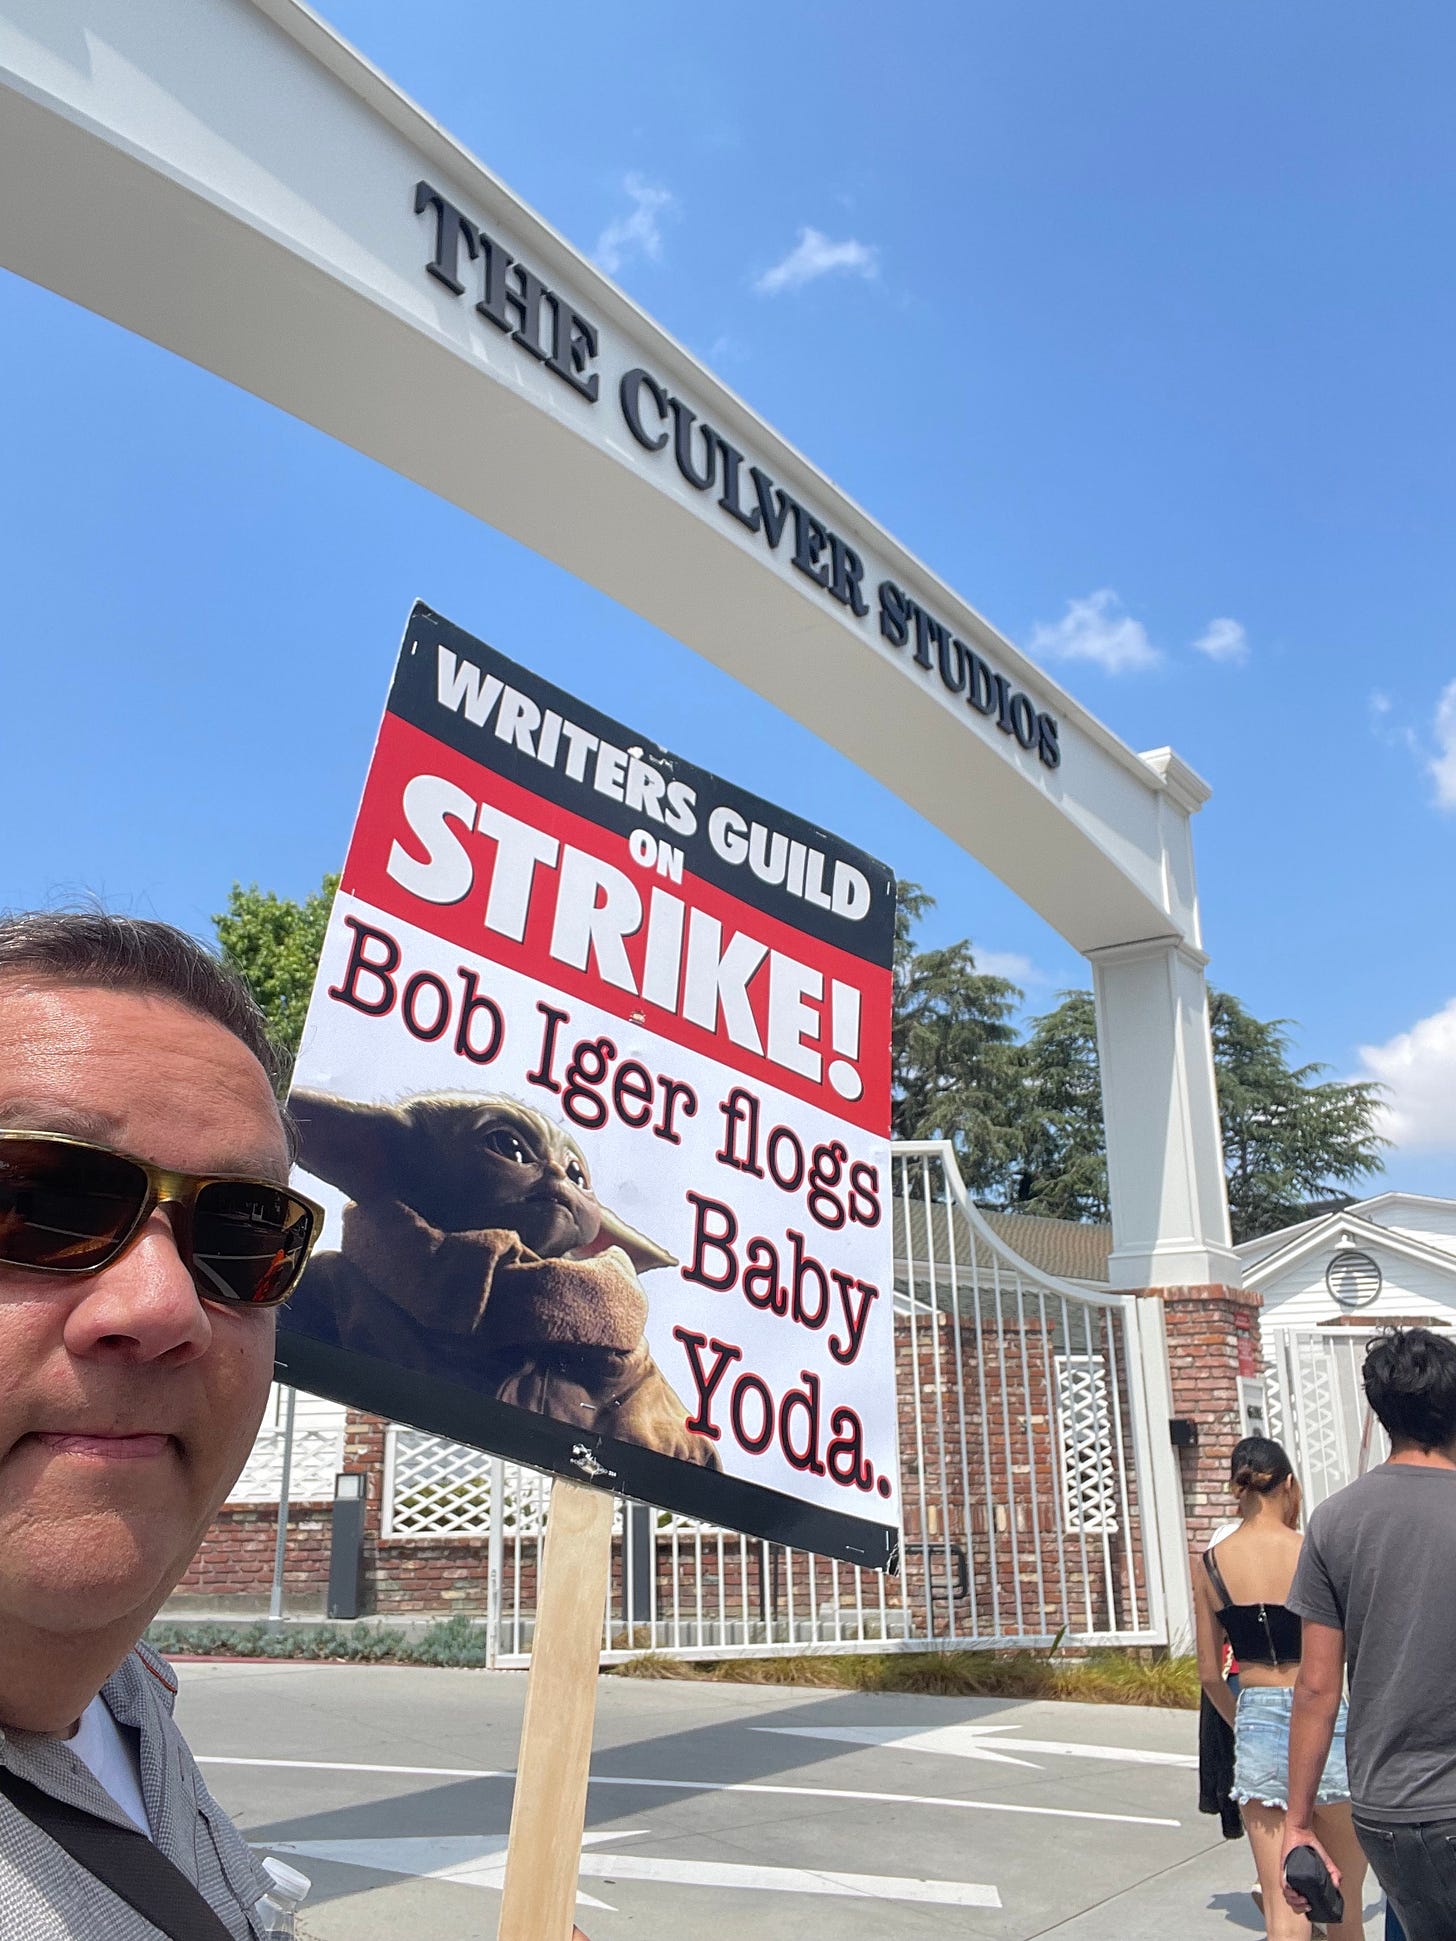 A picture of Mickey holding a sign that says "Bob Iger flogs Baby Yoda" with a picture of Grogu, Mickey is standing underneath the main gate at Culver Studios.